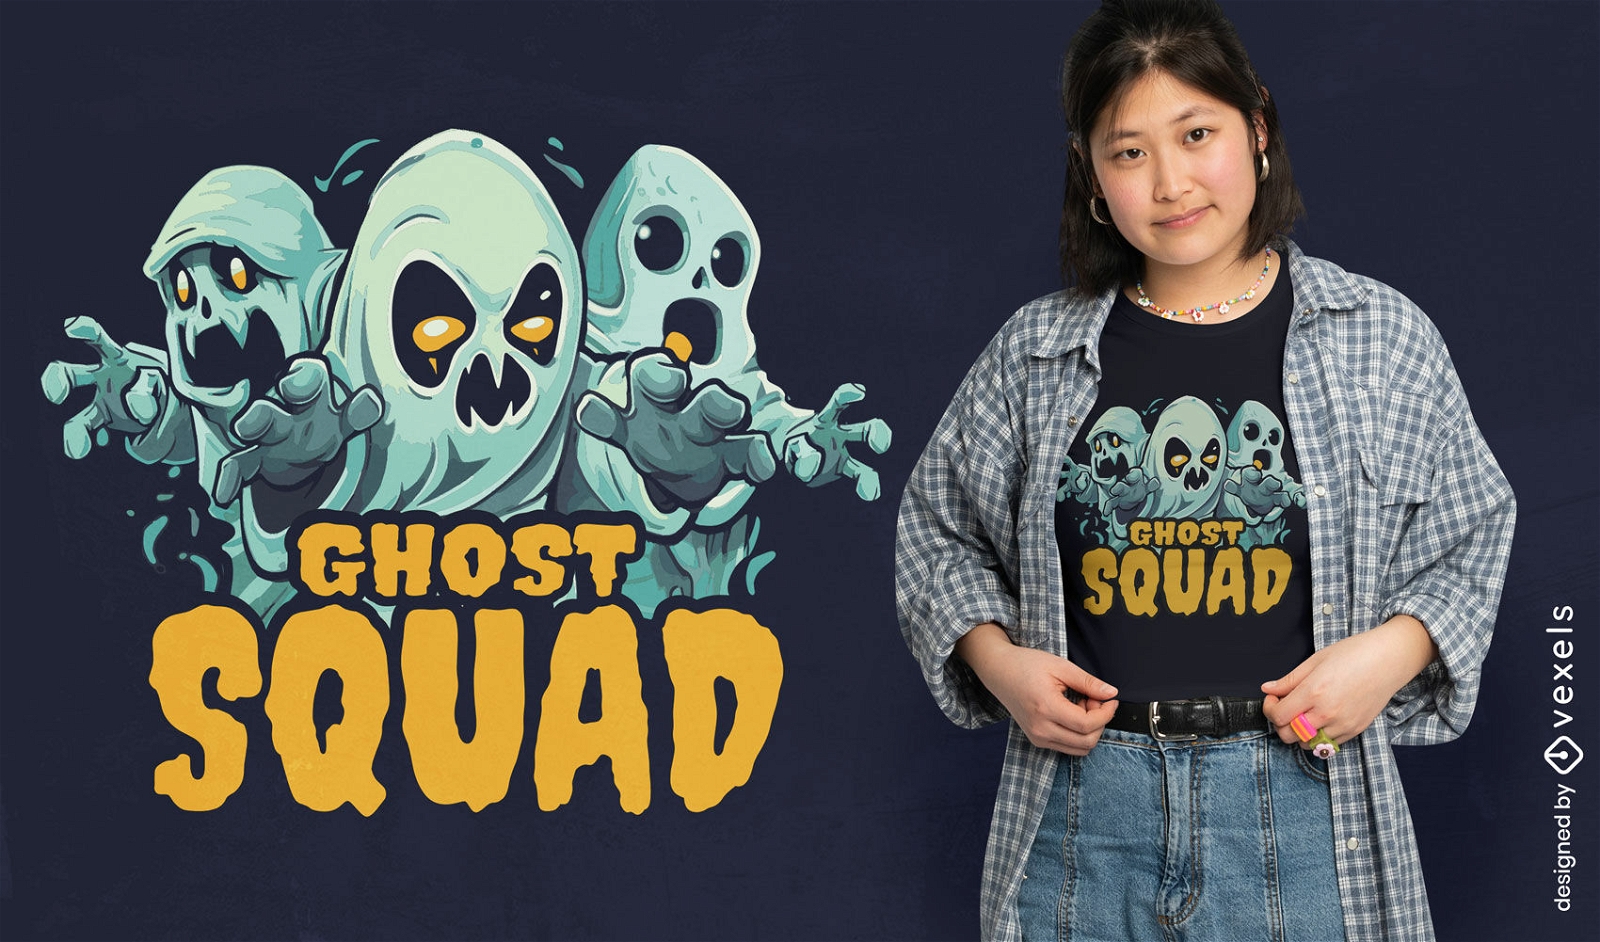 Scary ghost monster squad t-shirt design